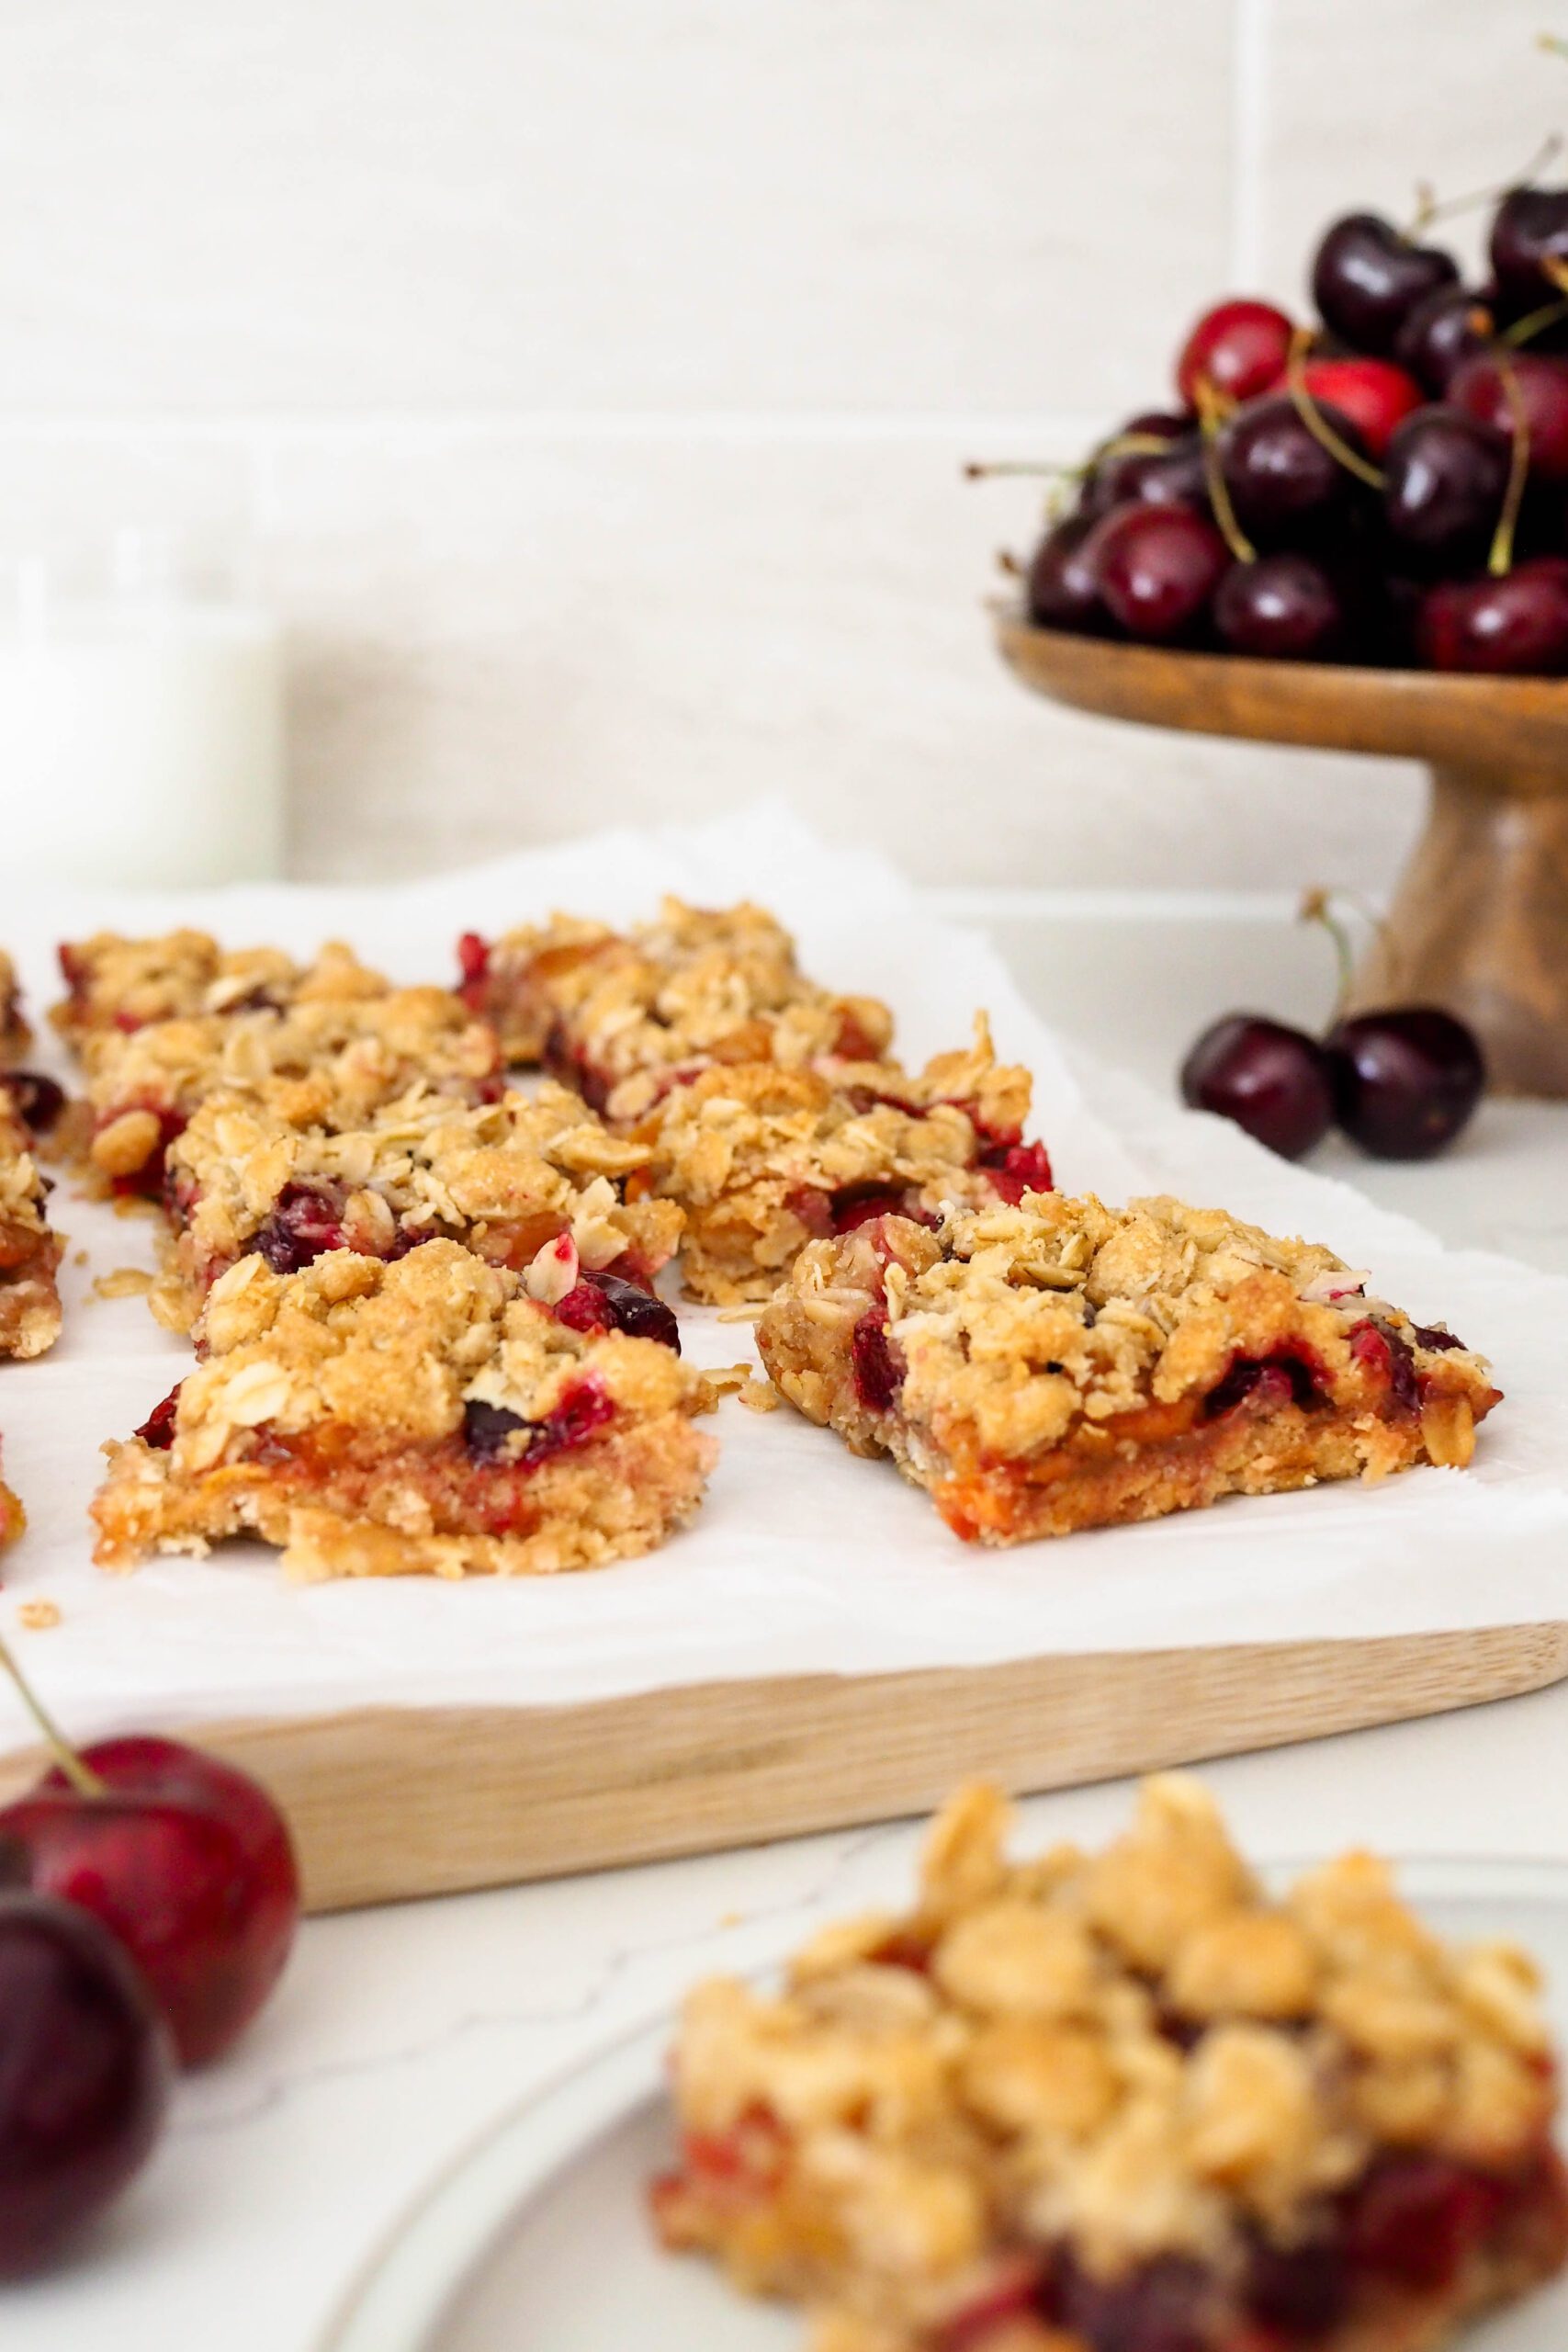 A batch of cherry crumble bars on parchment near cherries.